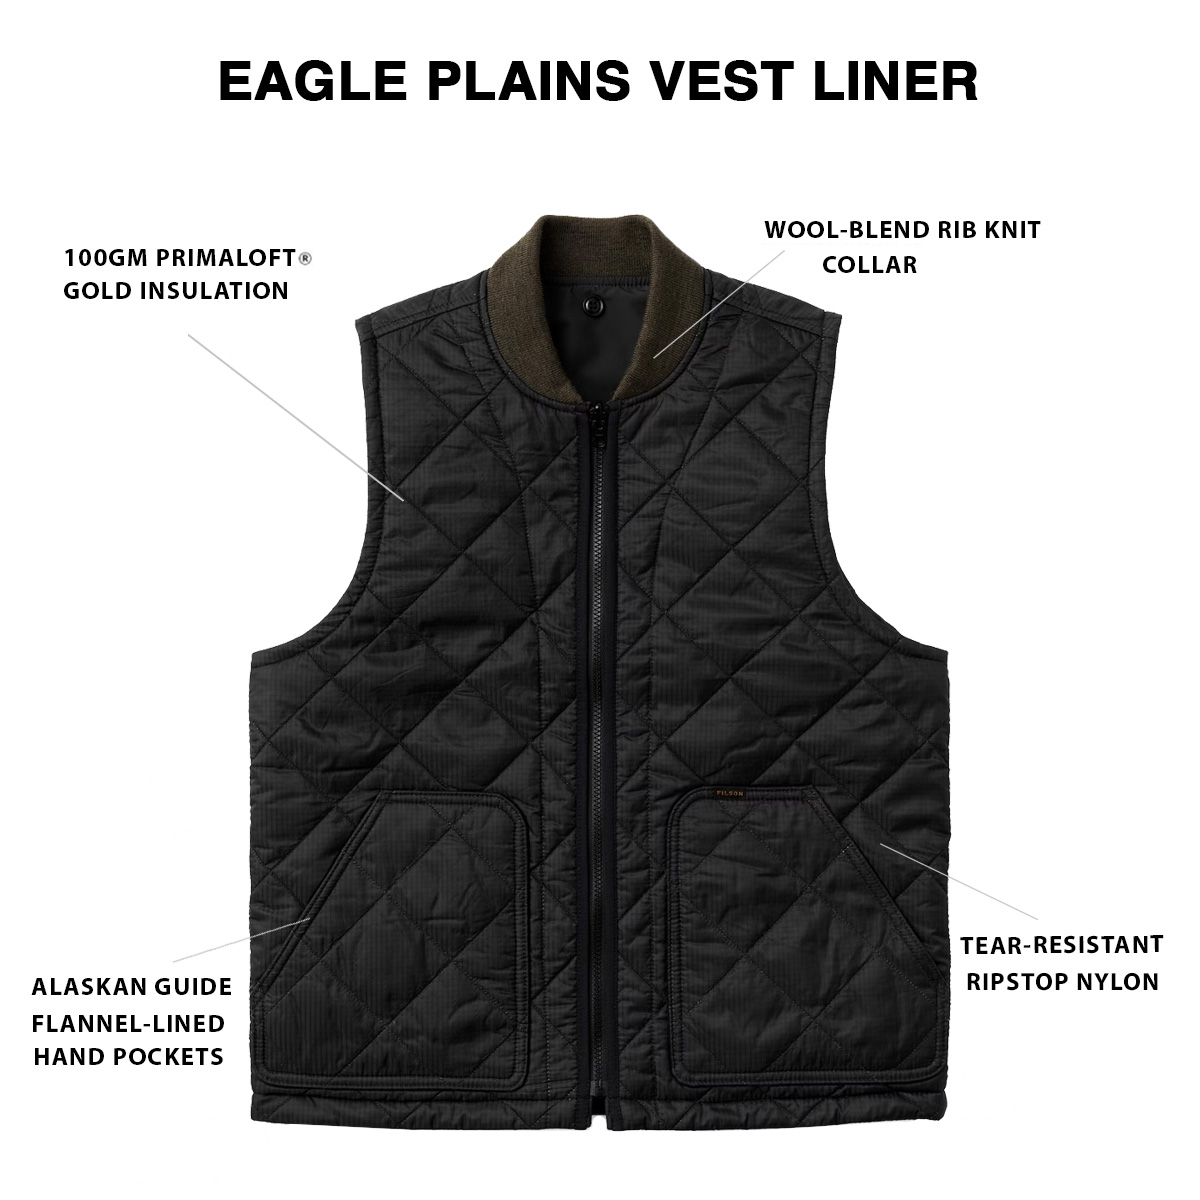 Filson Eagle Plains Vest Liner Charcoal, with Cordura® Ripstop nylon and 100gm PrimaLoft® Gold insulation